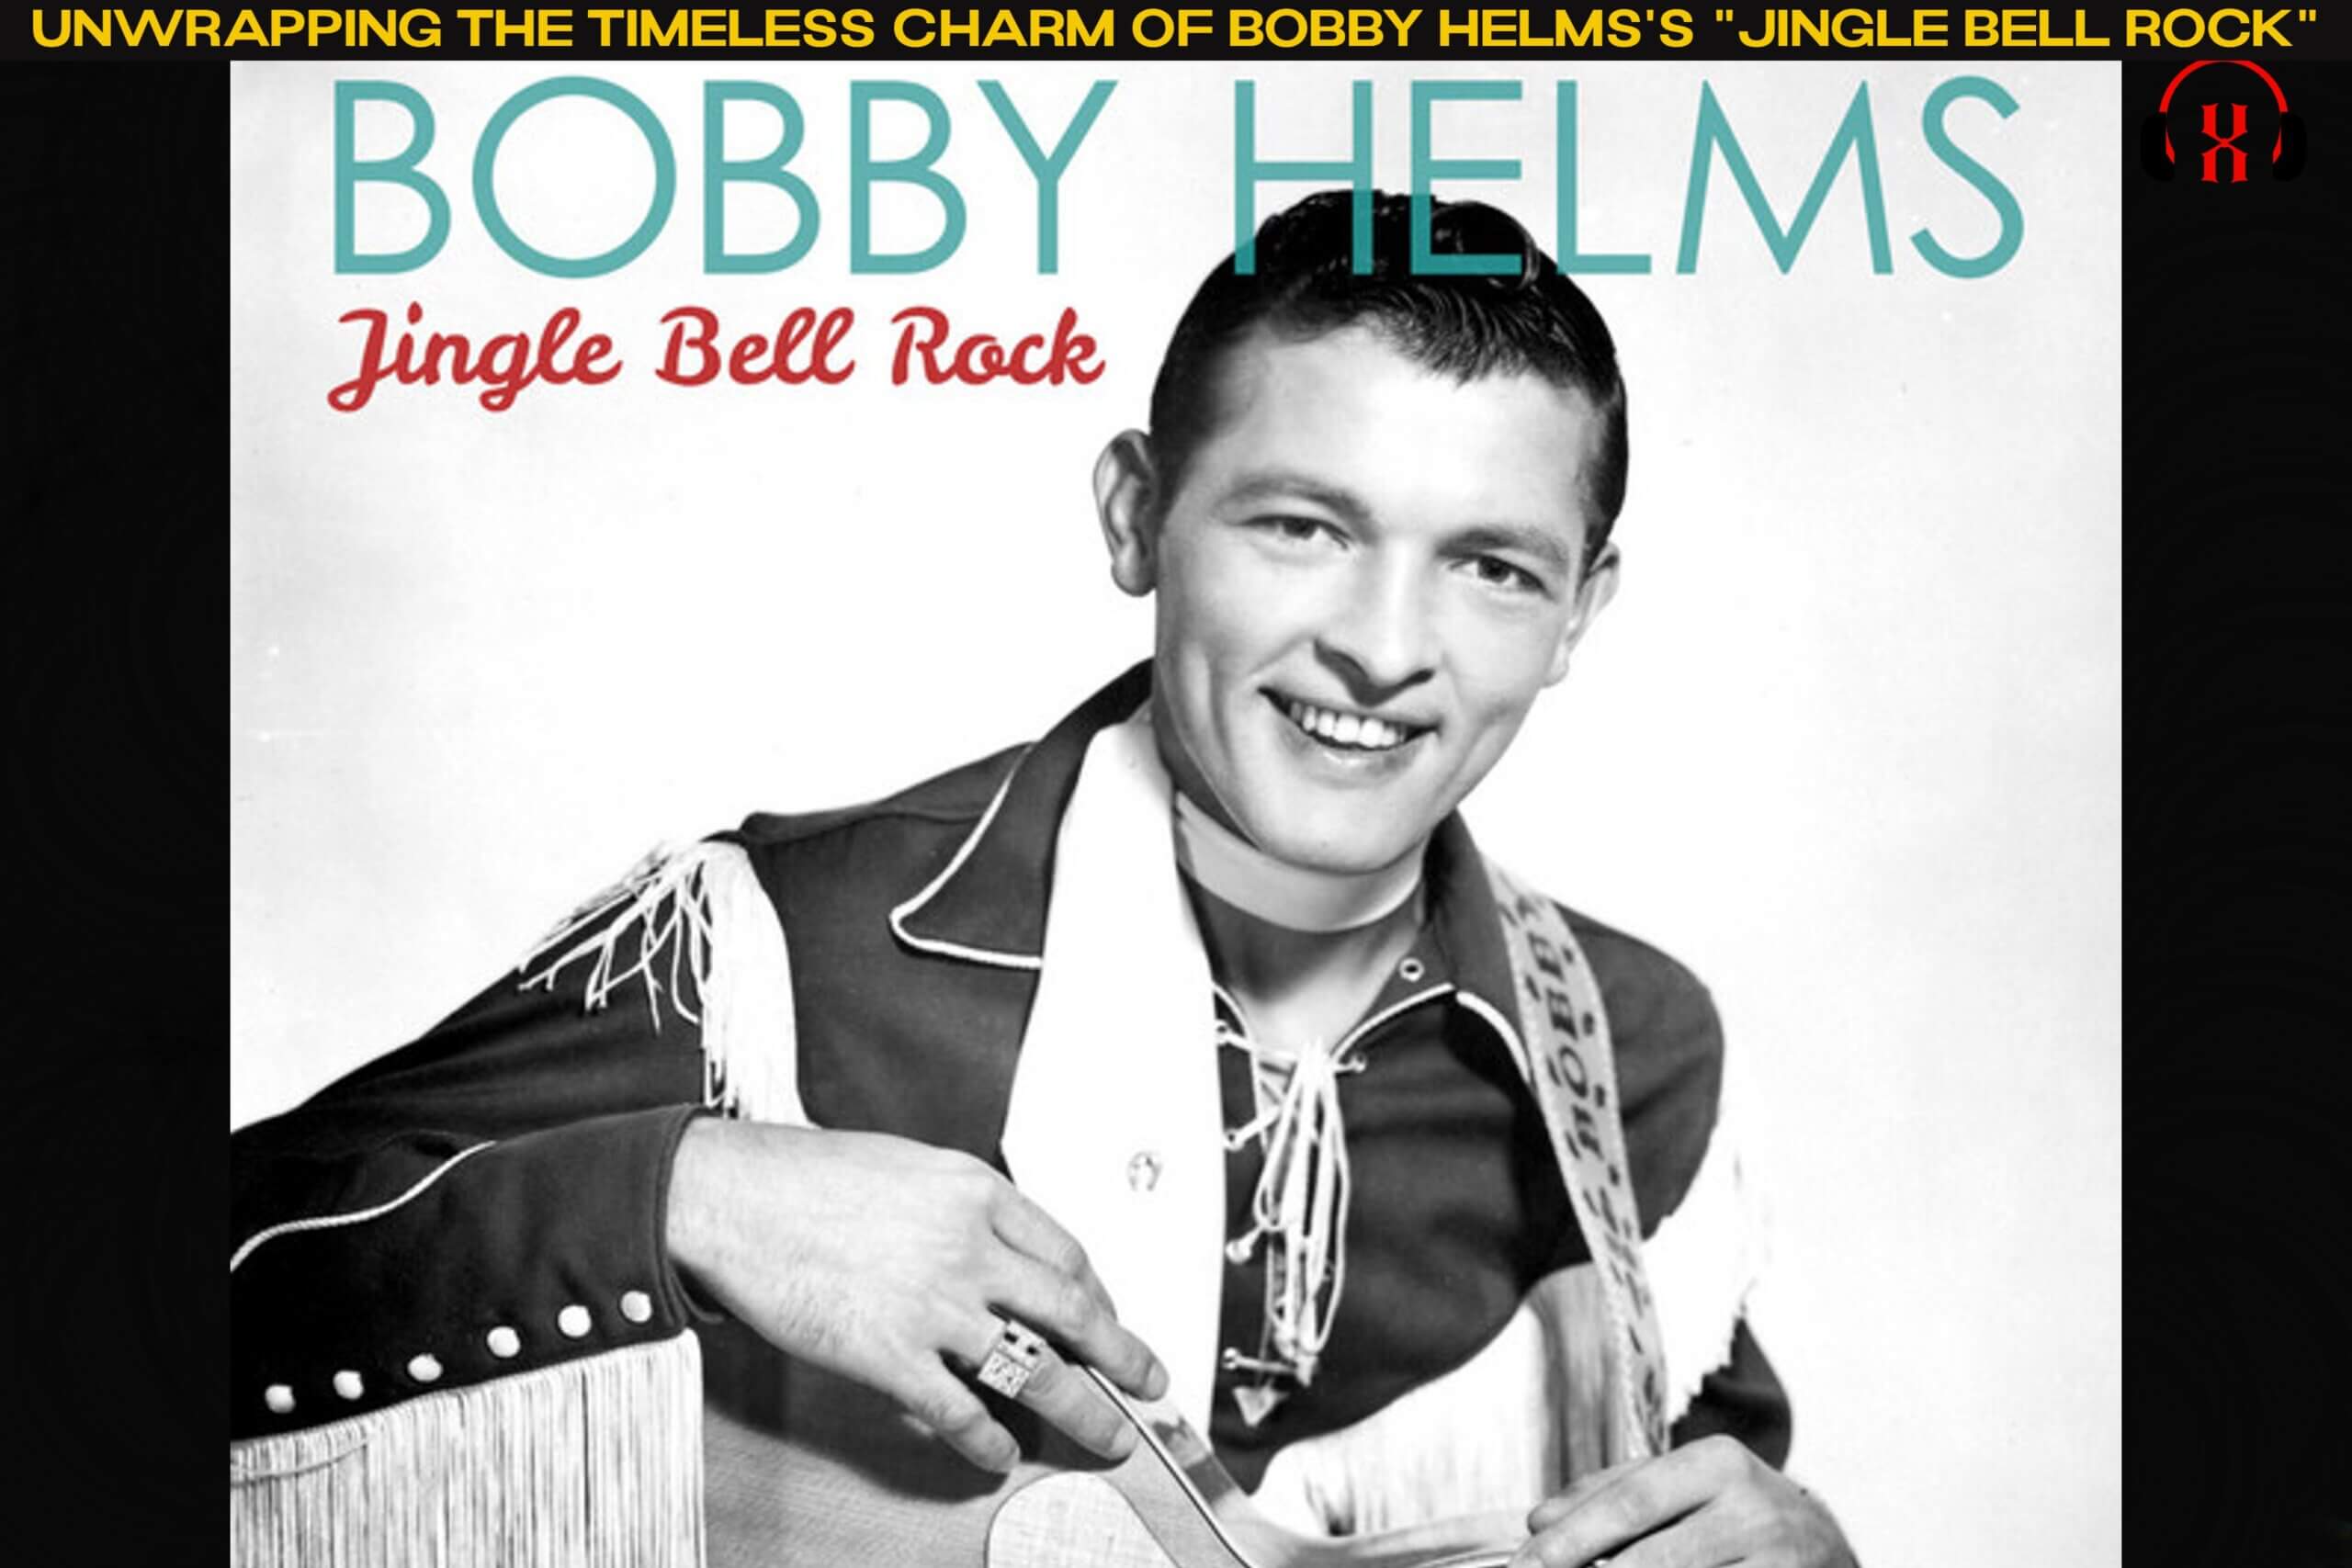 Unwrapping the Timeless Charm of Bobby Helms's "Jingle Bell Rock"